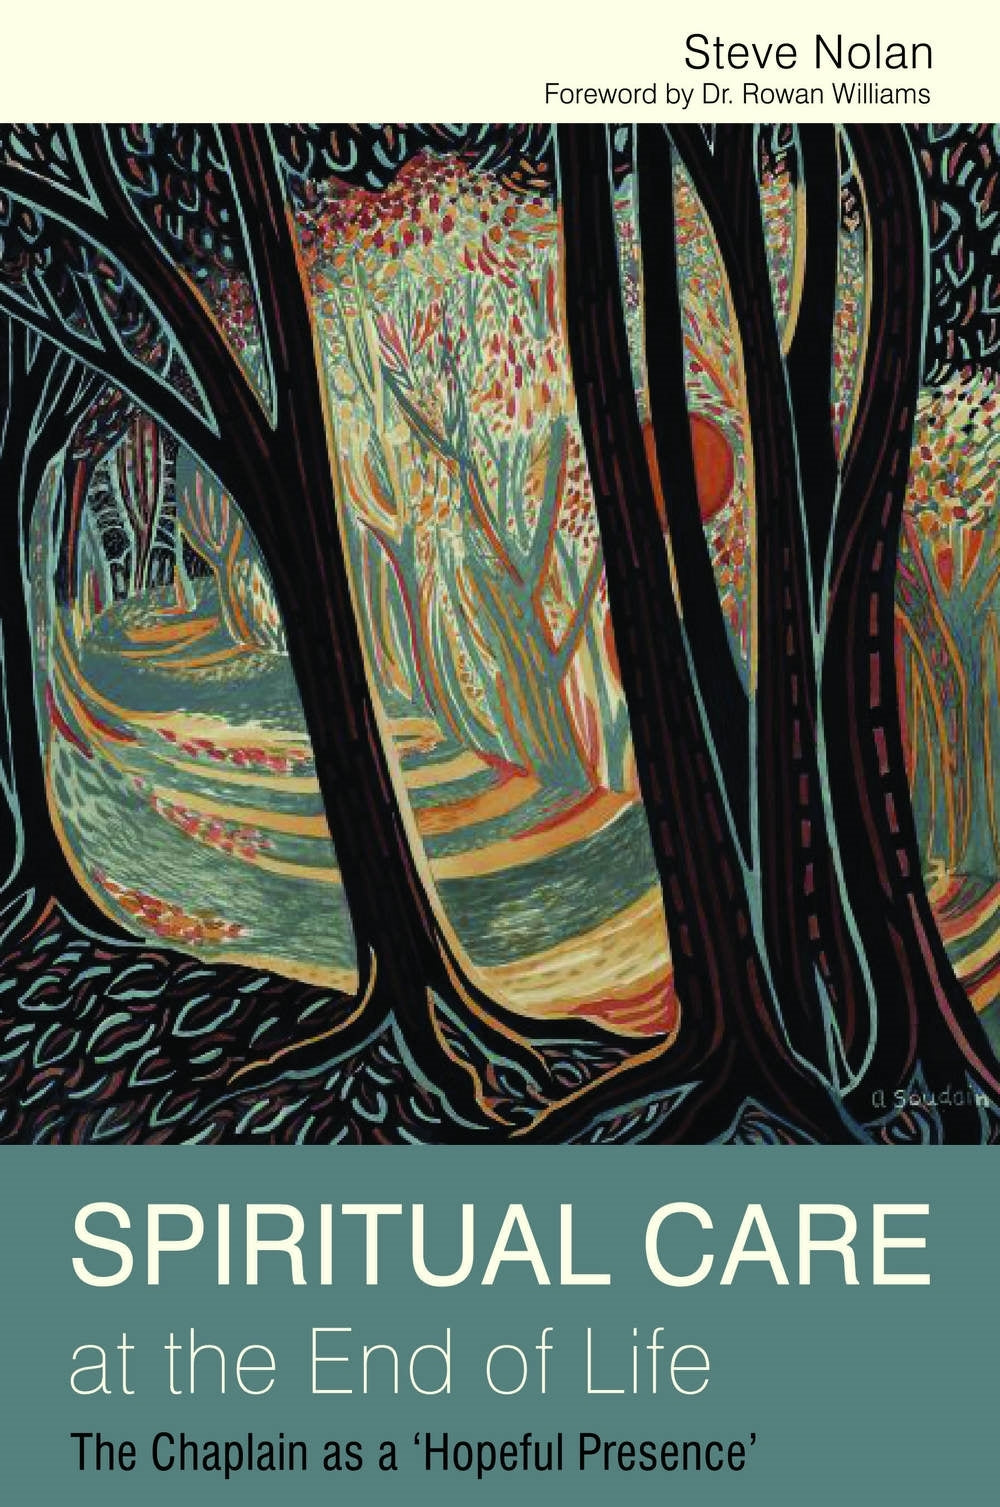 Spiritual Care at the End of Life by Steve Nolan